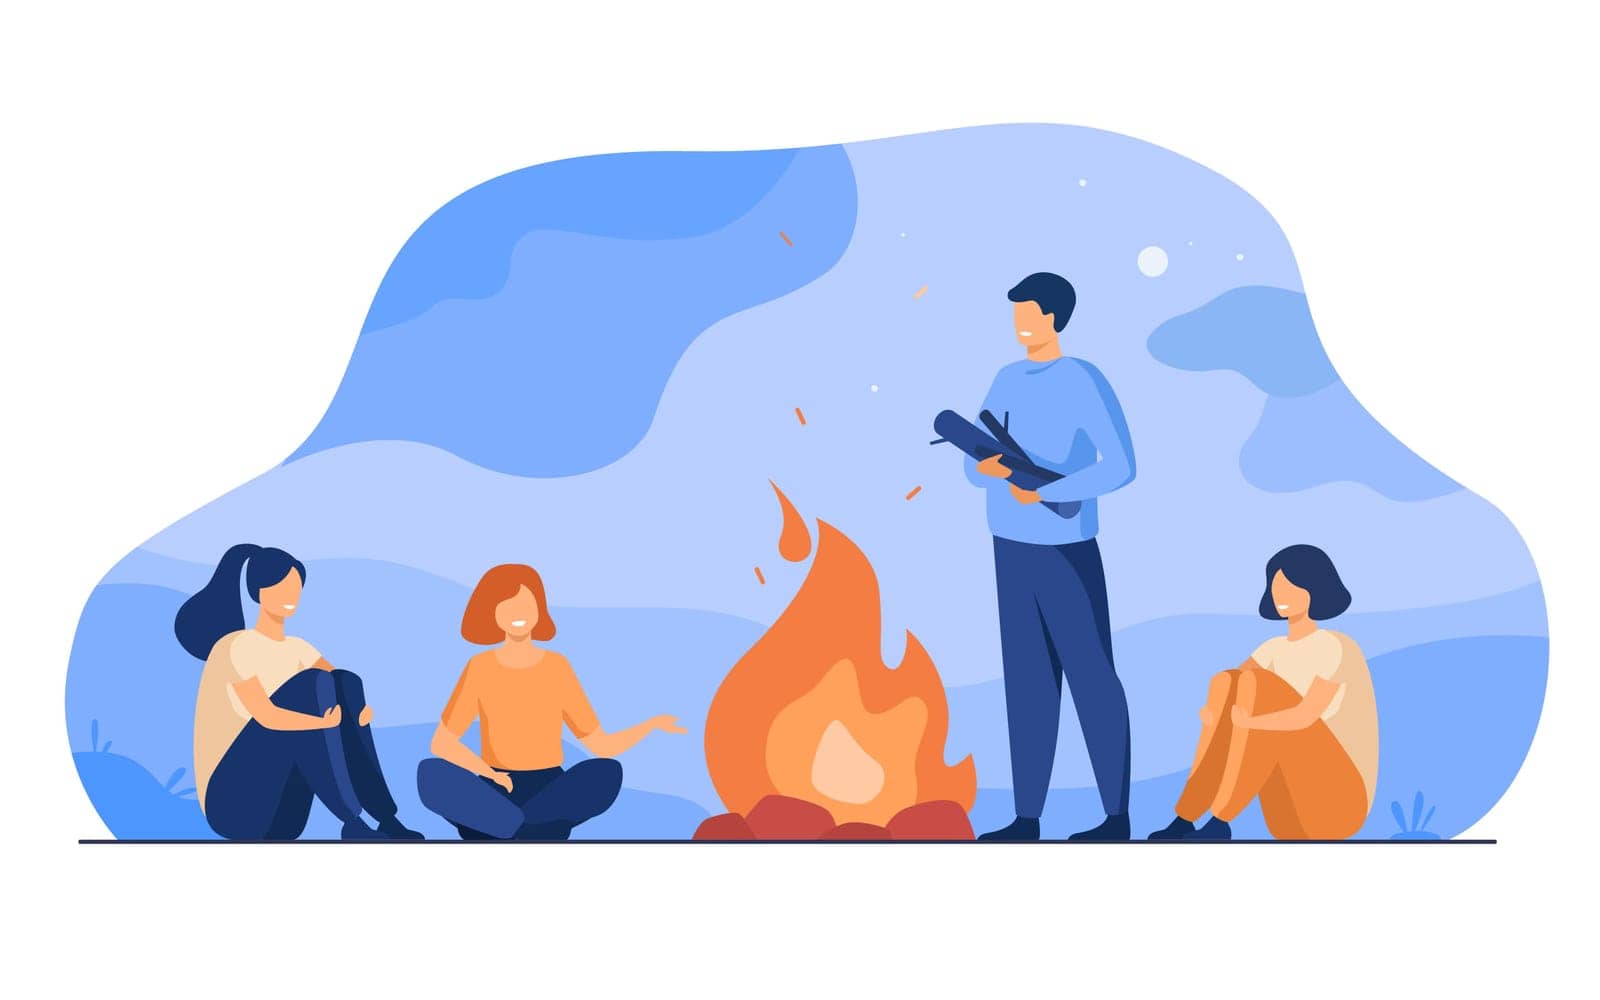 Campfire, camping, story telling concept. Cheerful people sitting at fire, telling scary stories, having fun. For summer outdoor activities or leisure time with friends topics